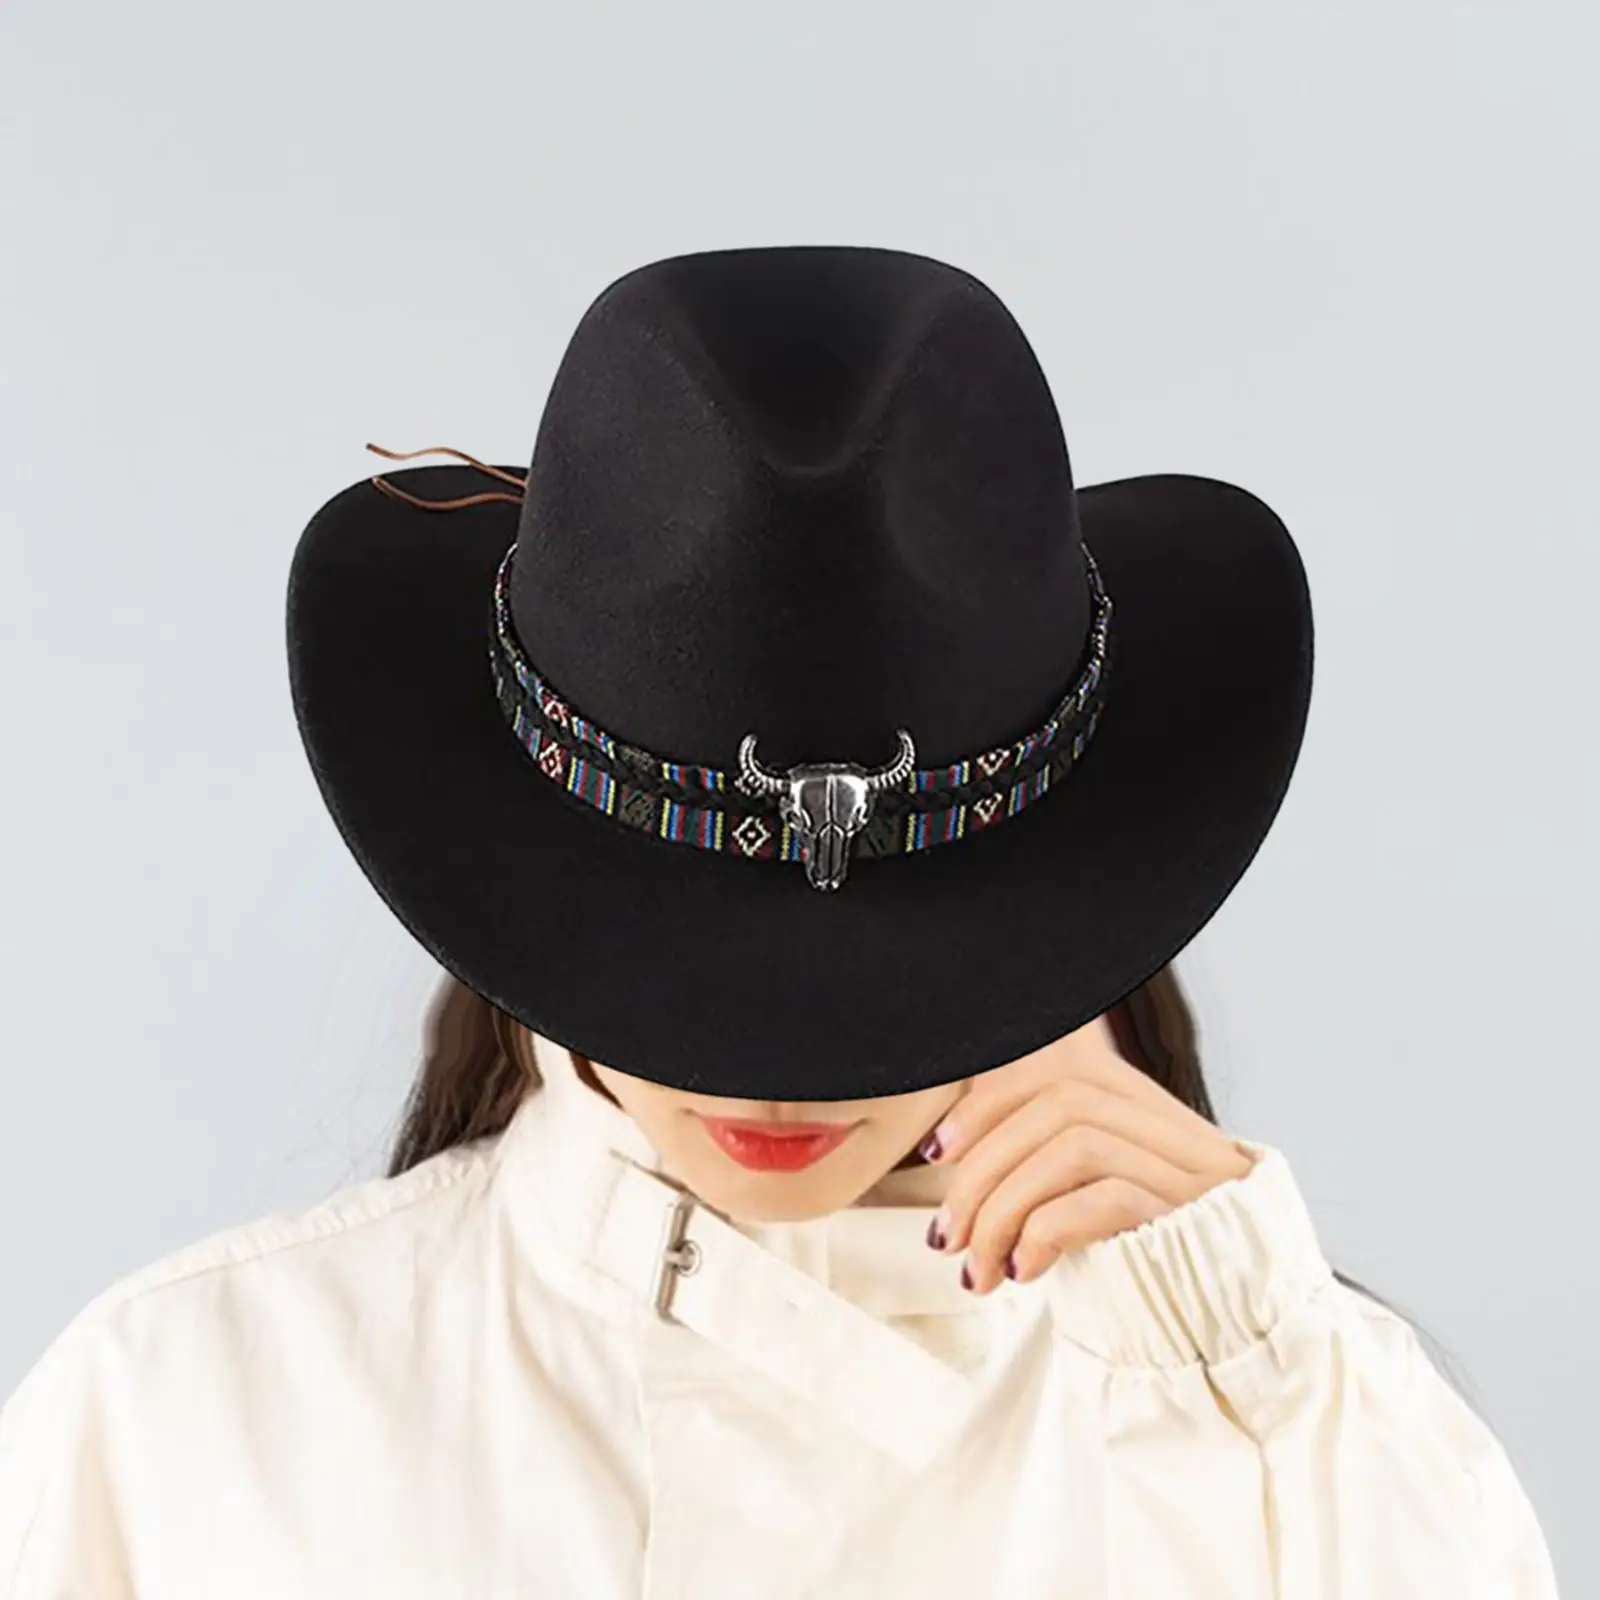 Cowgirl Hat Wide Brim Hat Black Windproof Trendy for Adults Dress up Outdoor